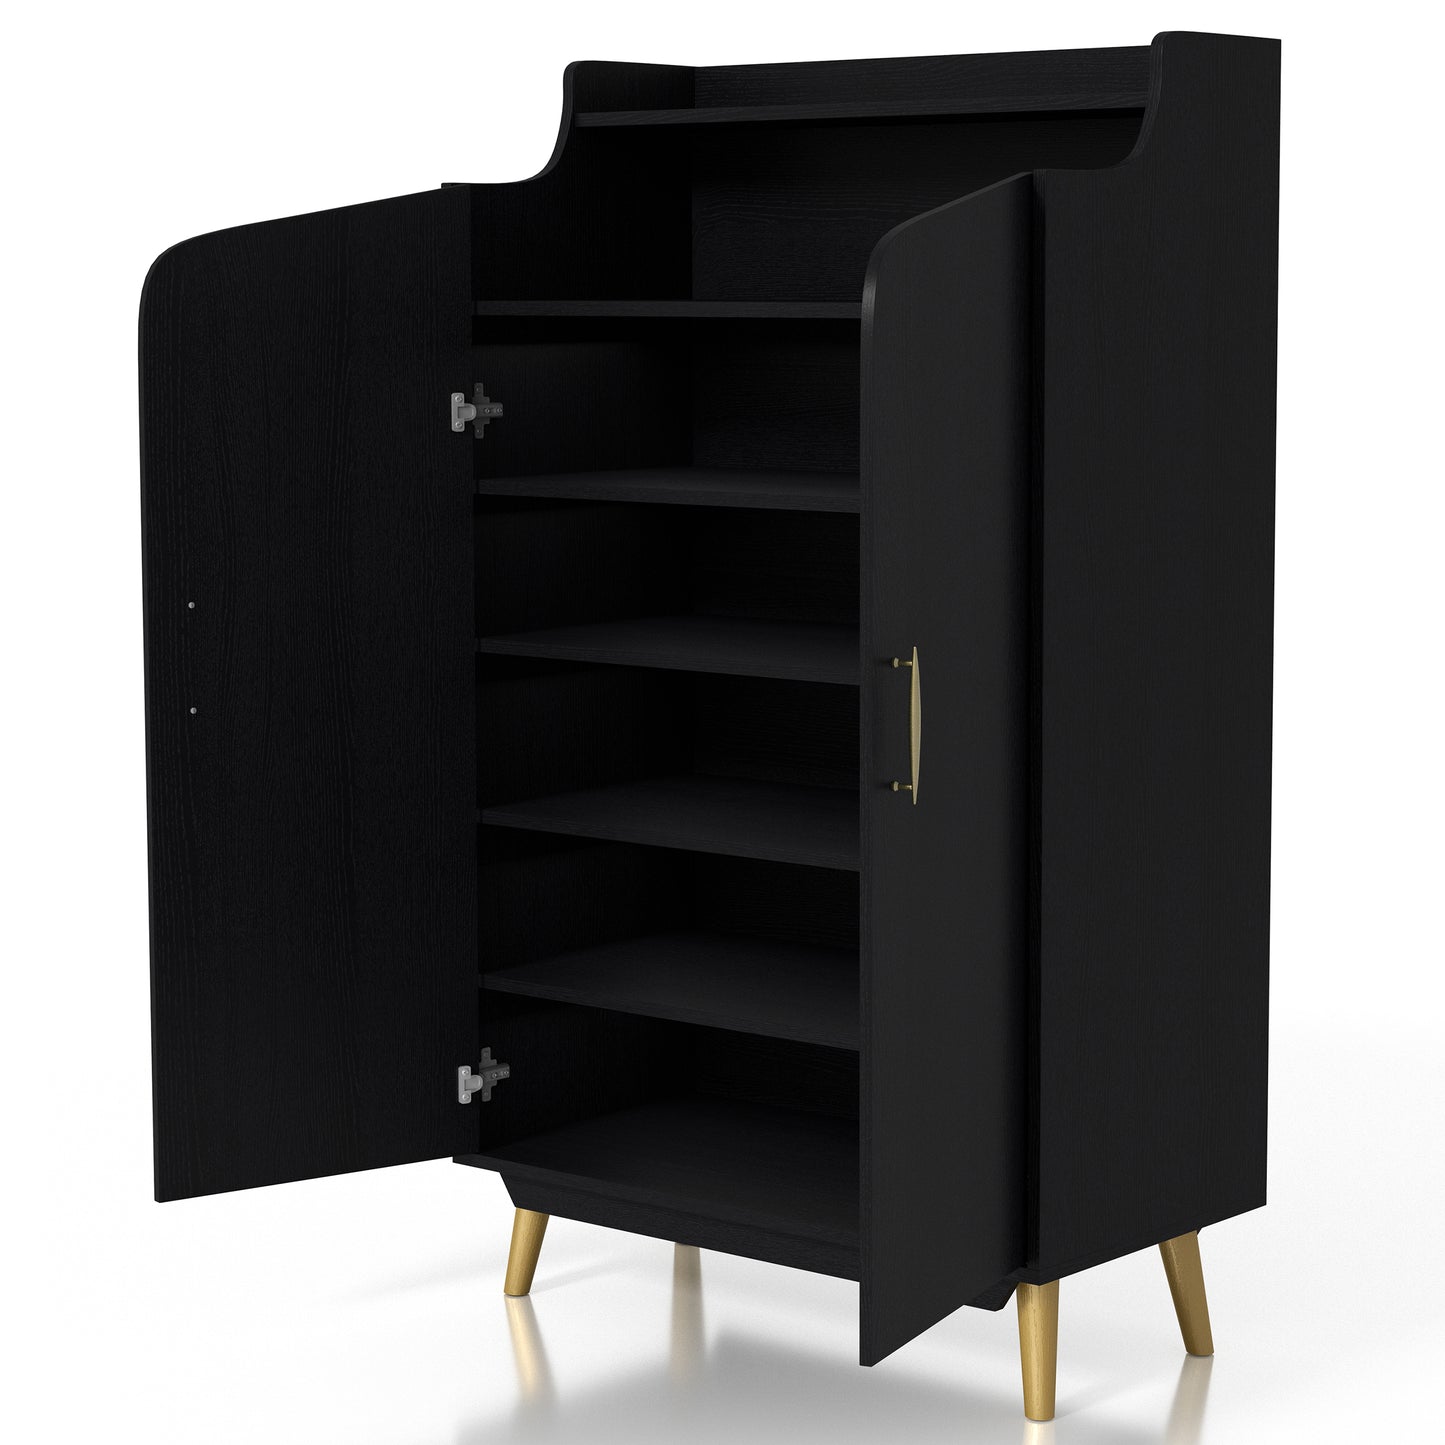 Left angled transitional black and gold two-door 14-pair shoe cabinet with doors open on a white background